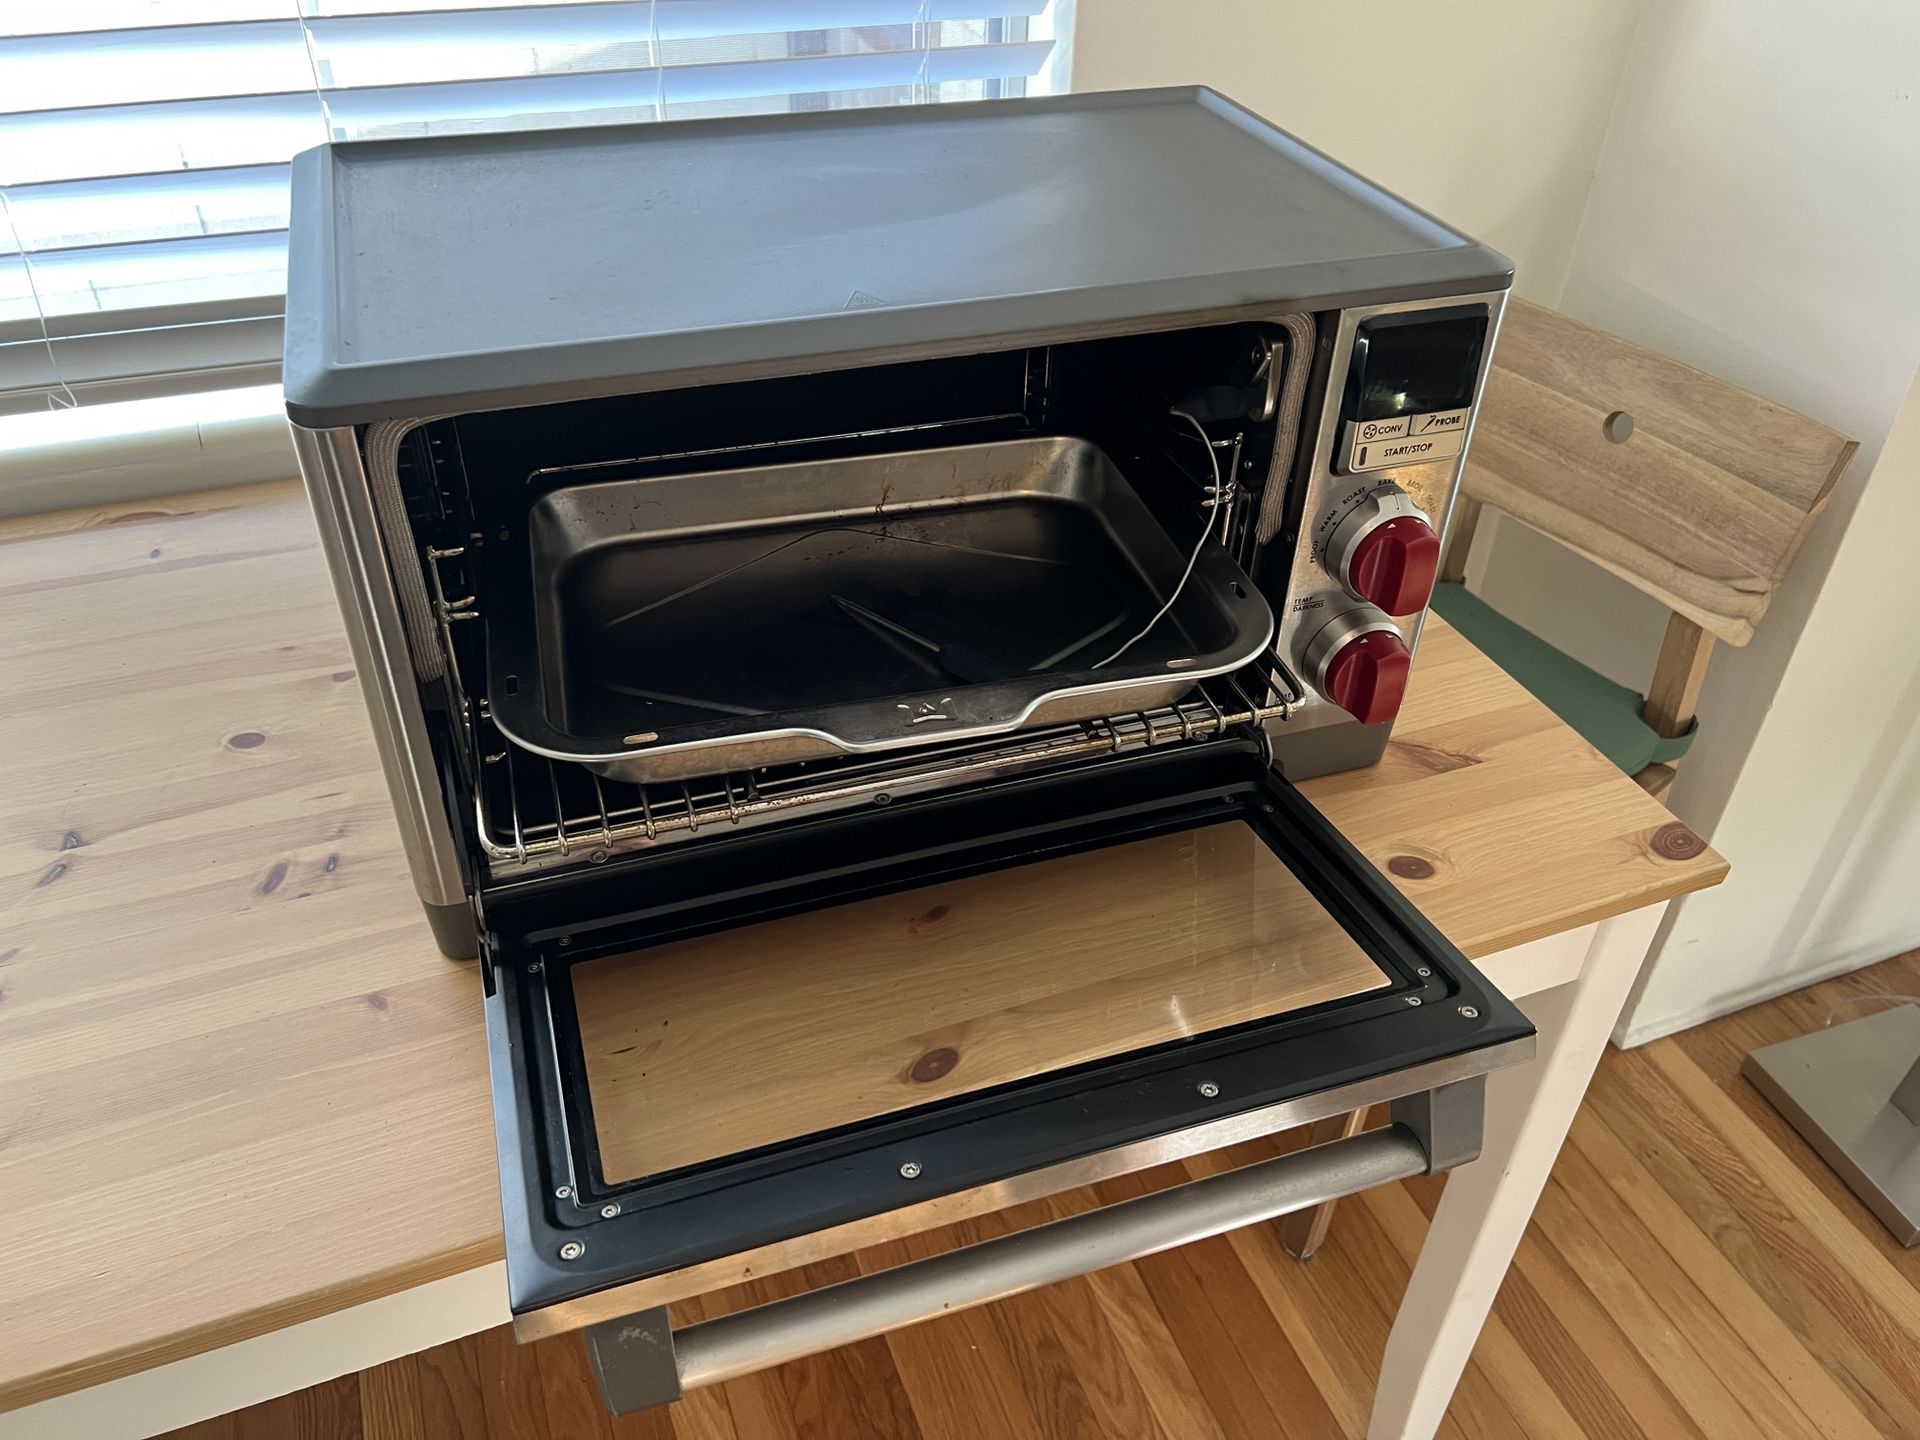 WOLF Countertop Oven for Sale in Los Angeles, CA - OfferUp